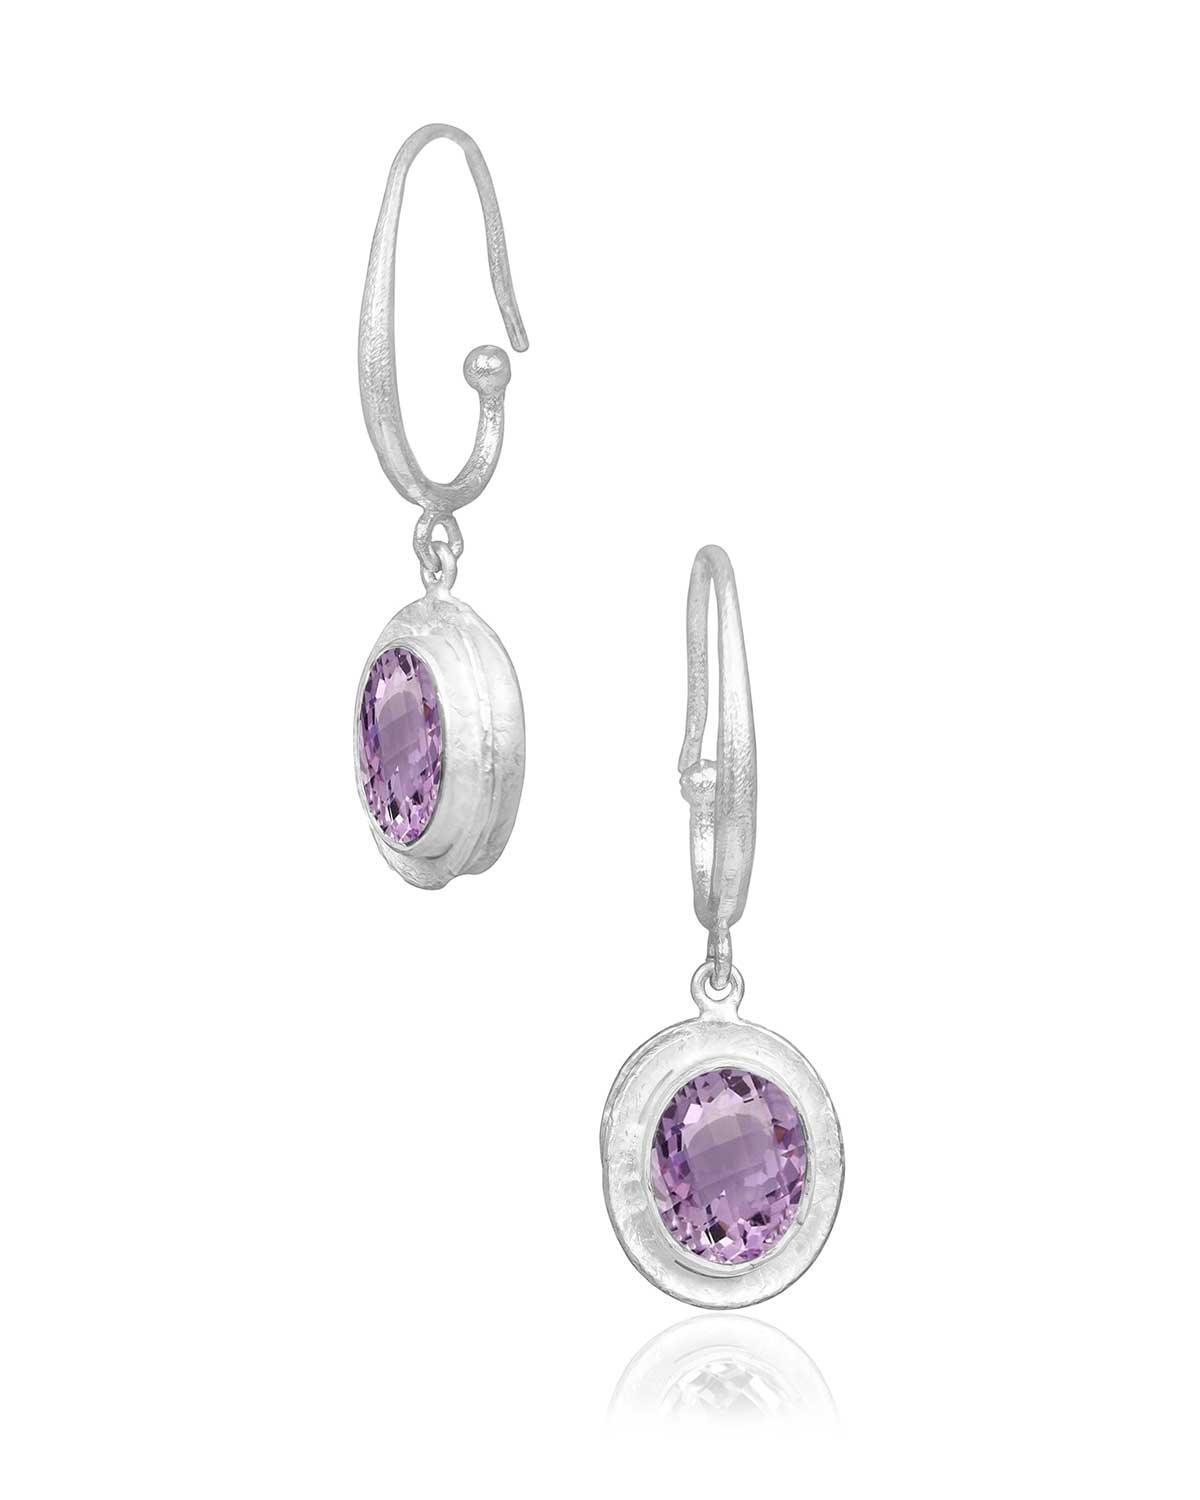 Compassion Pink Amethyst Silver Earrings - Moon London